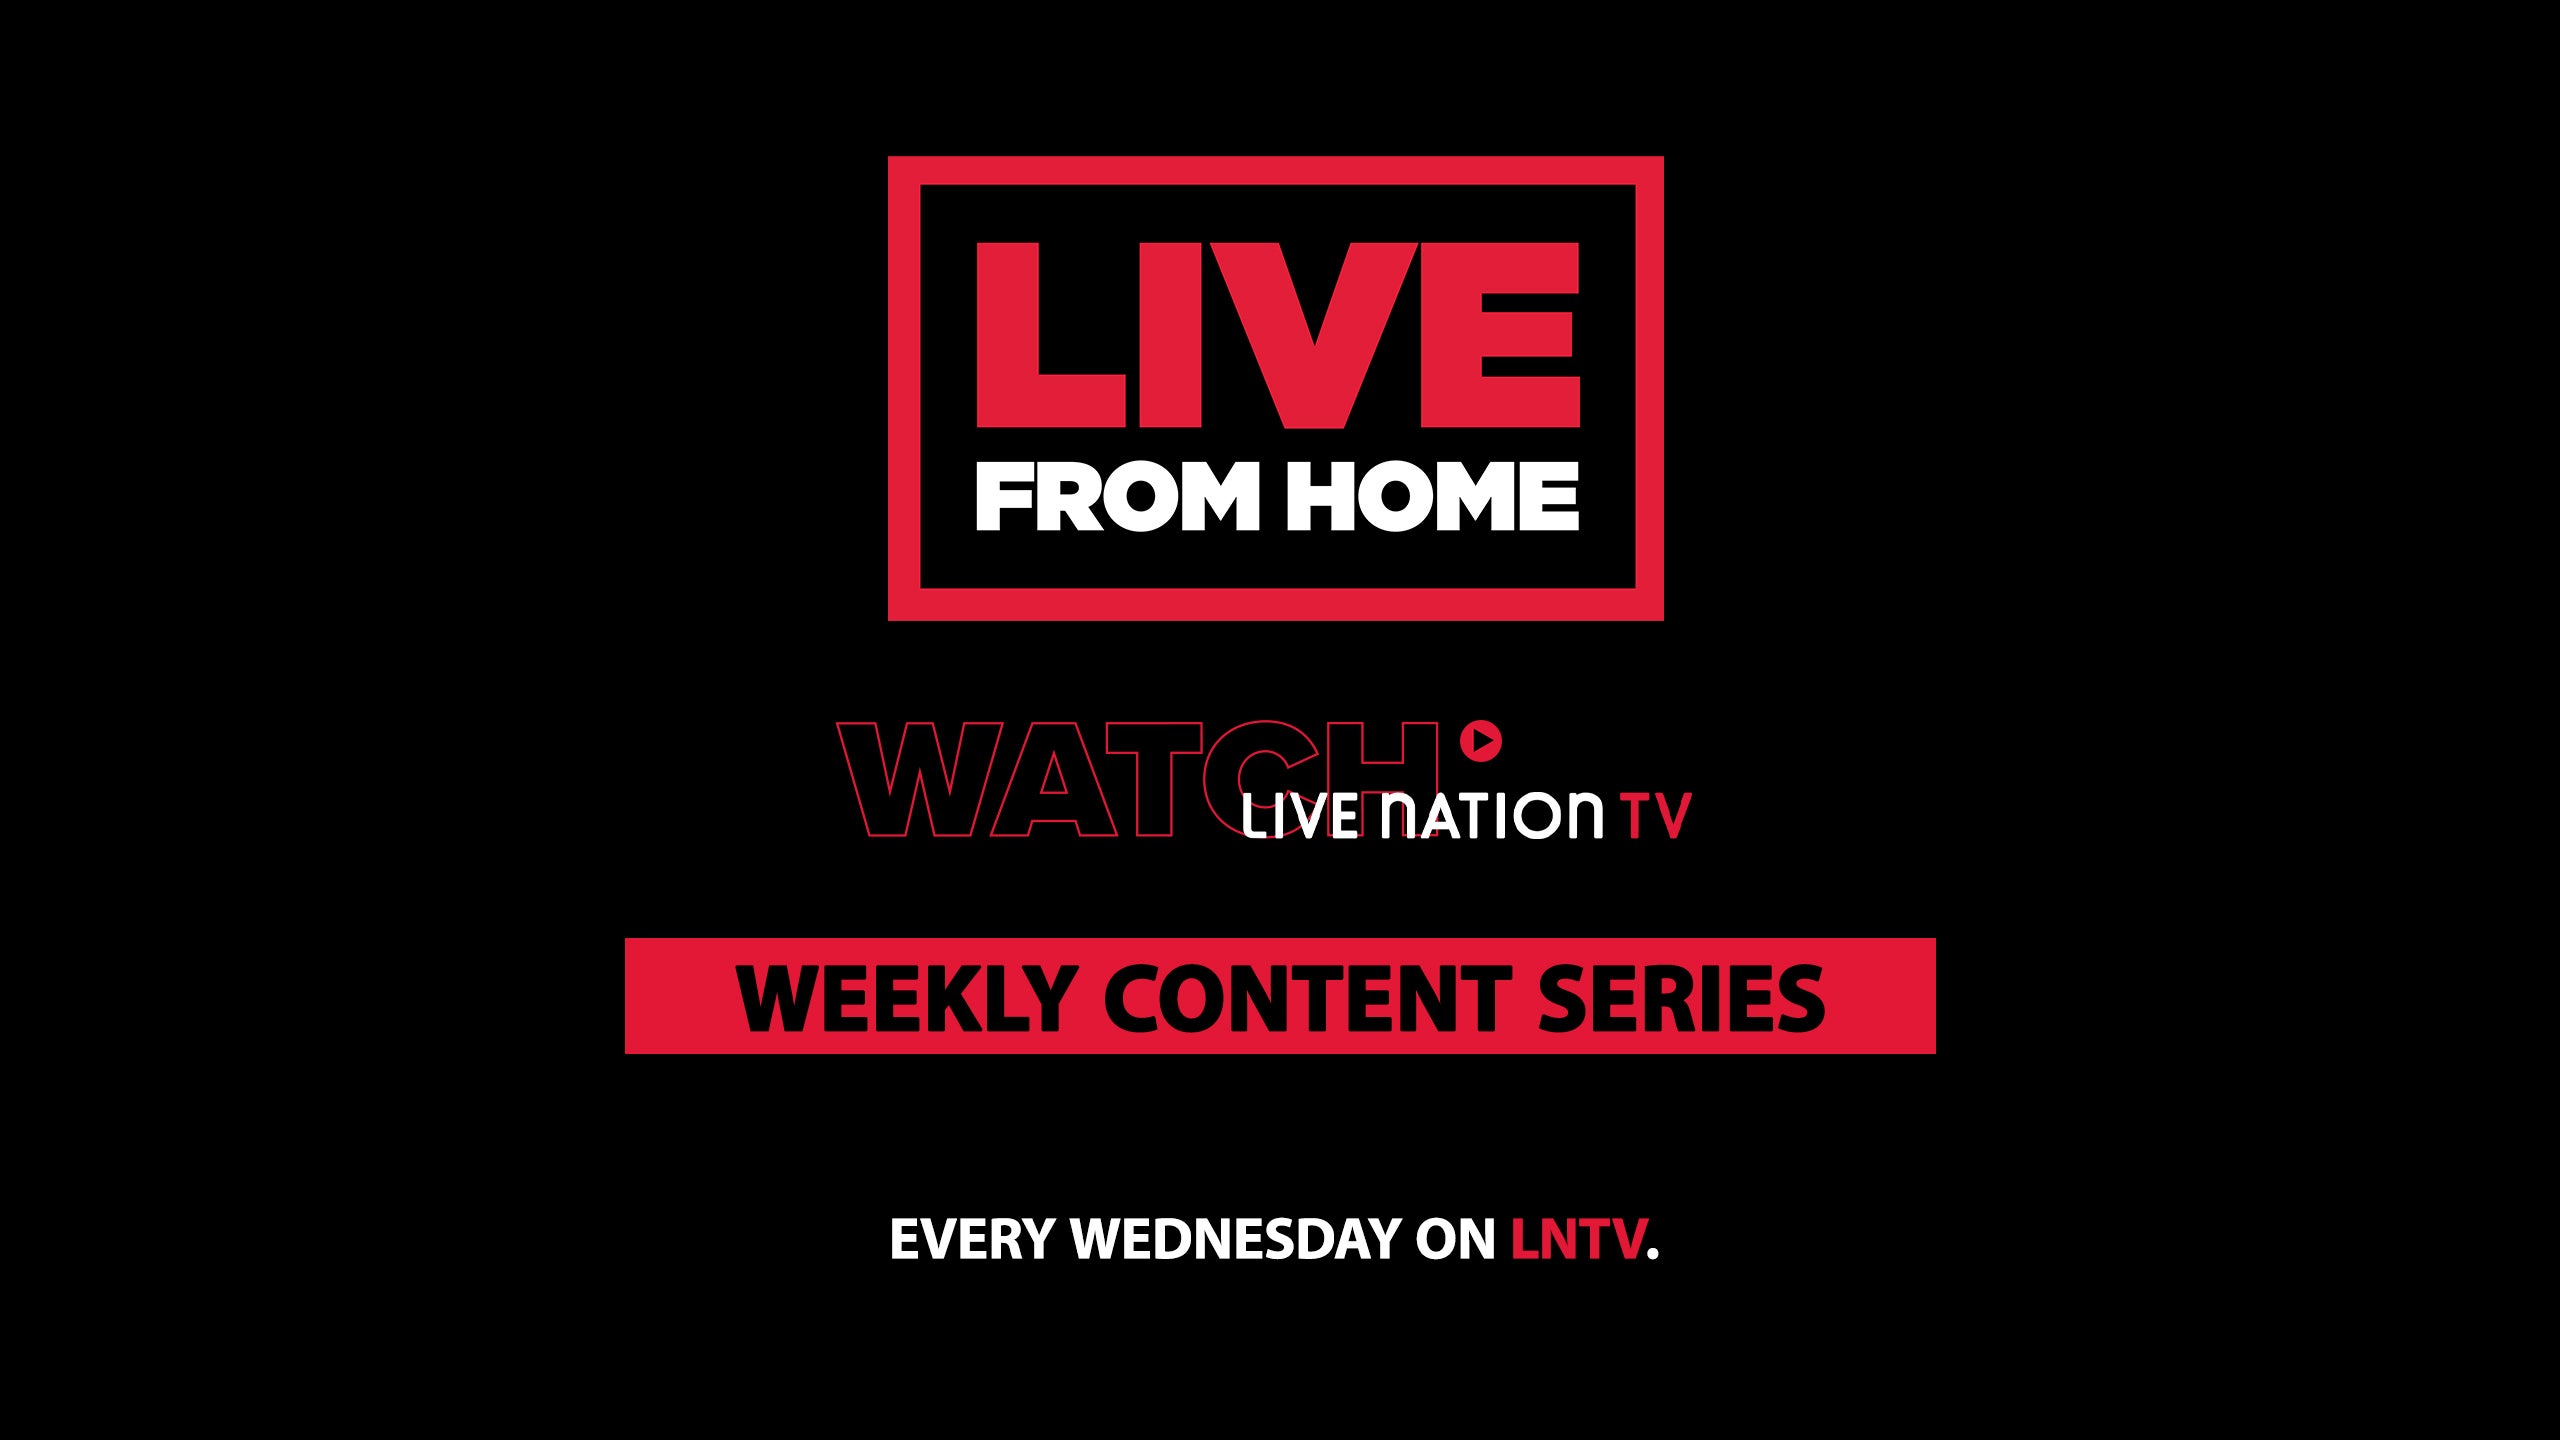 NEW: LNTV Live From Home Weekly Content Series